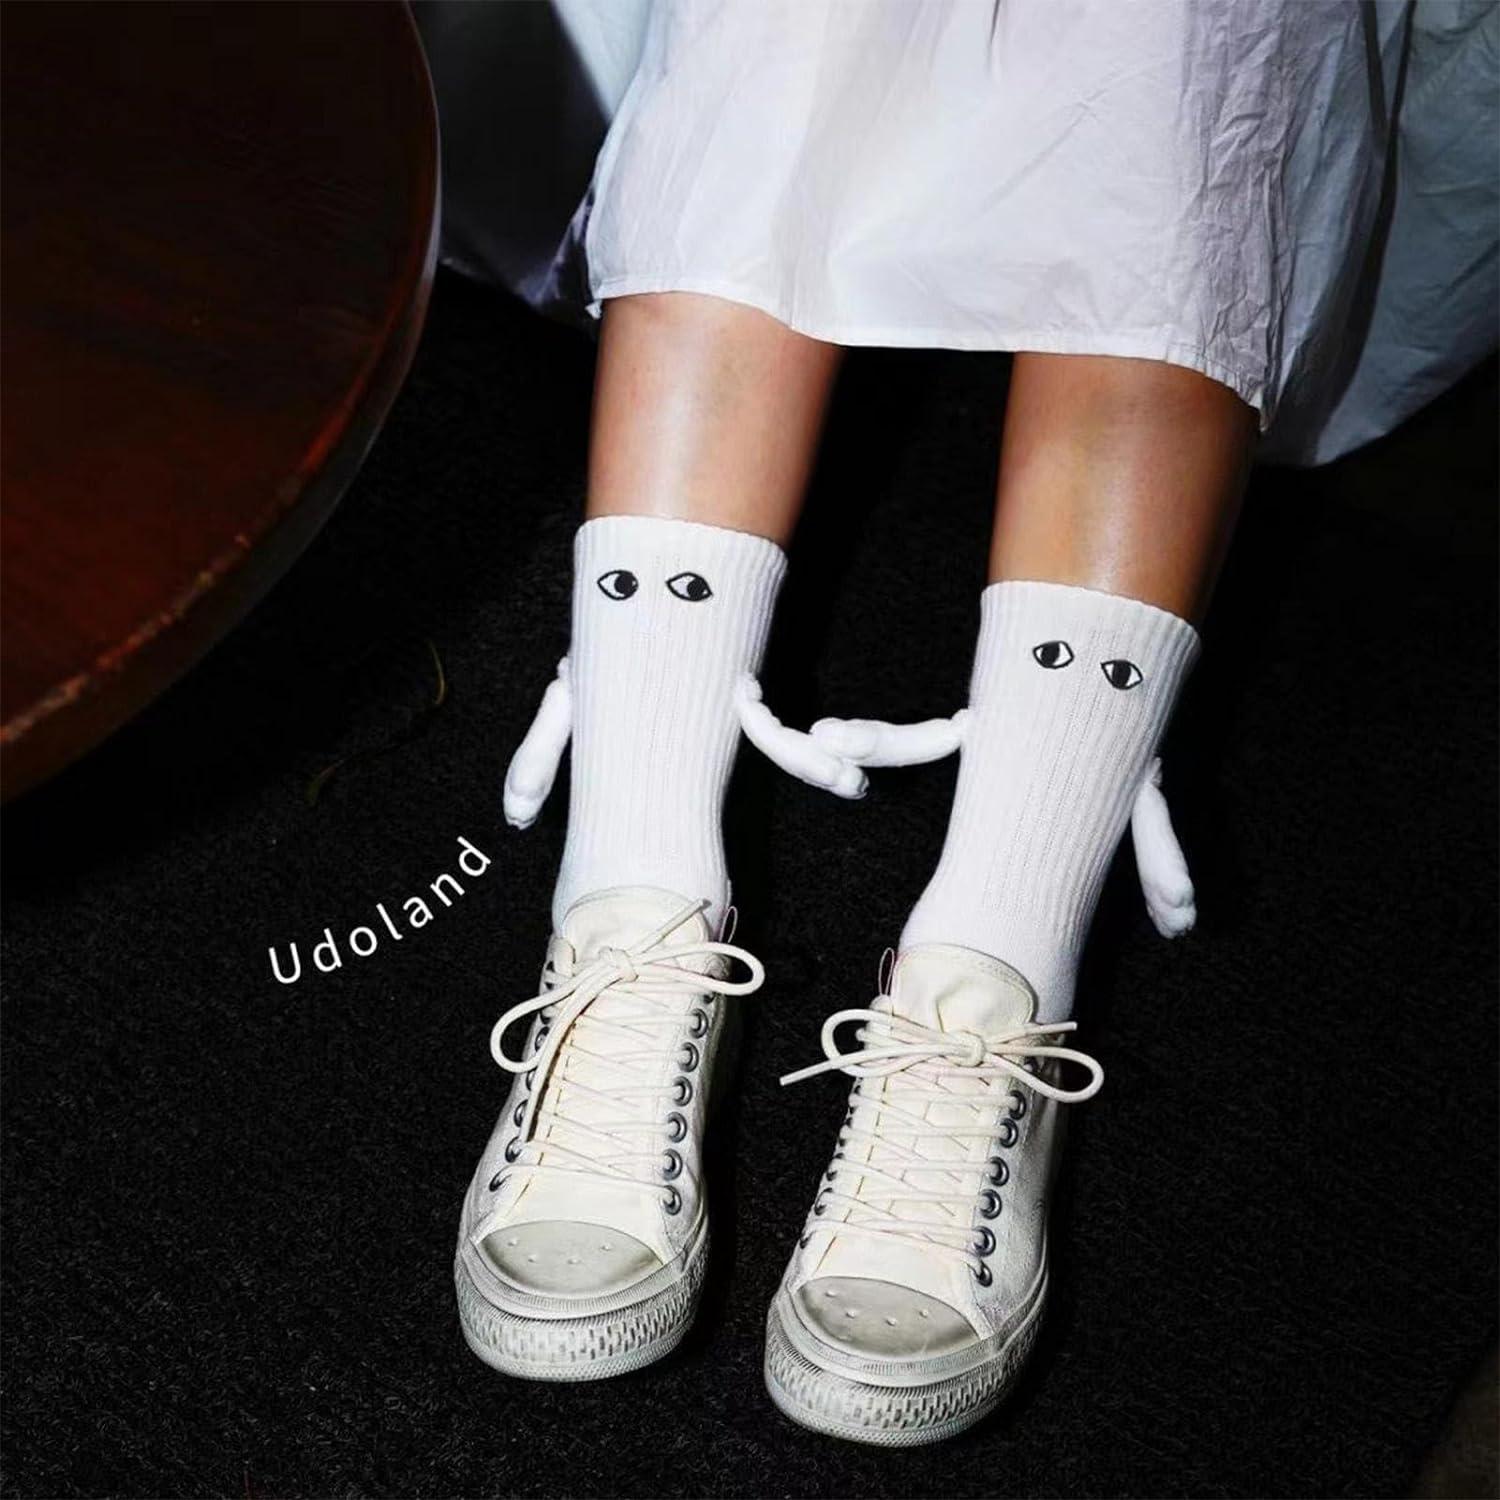 Ayammahic Funny Magnetic Suction 3D Doll Couple Socks Novelty Socks for  Women Men Couple Holding Hands Sock for Couple Gifts